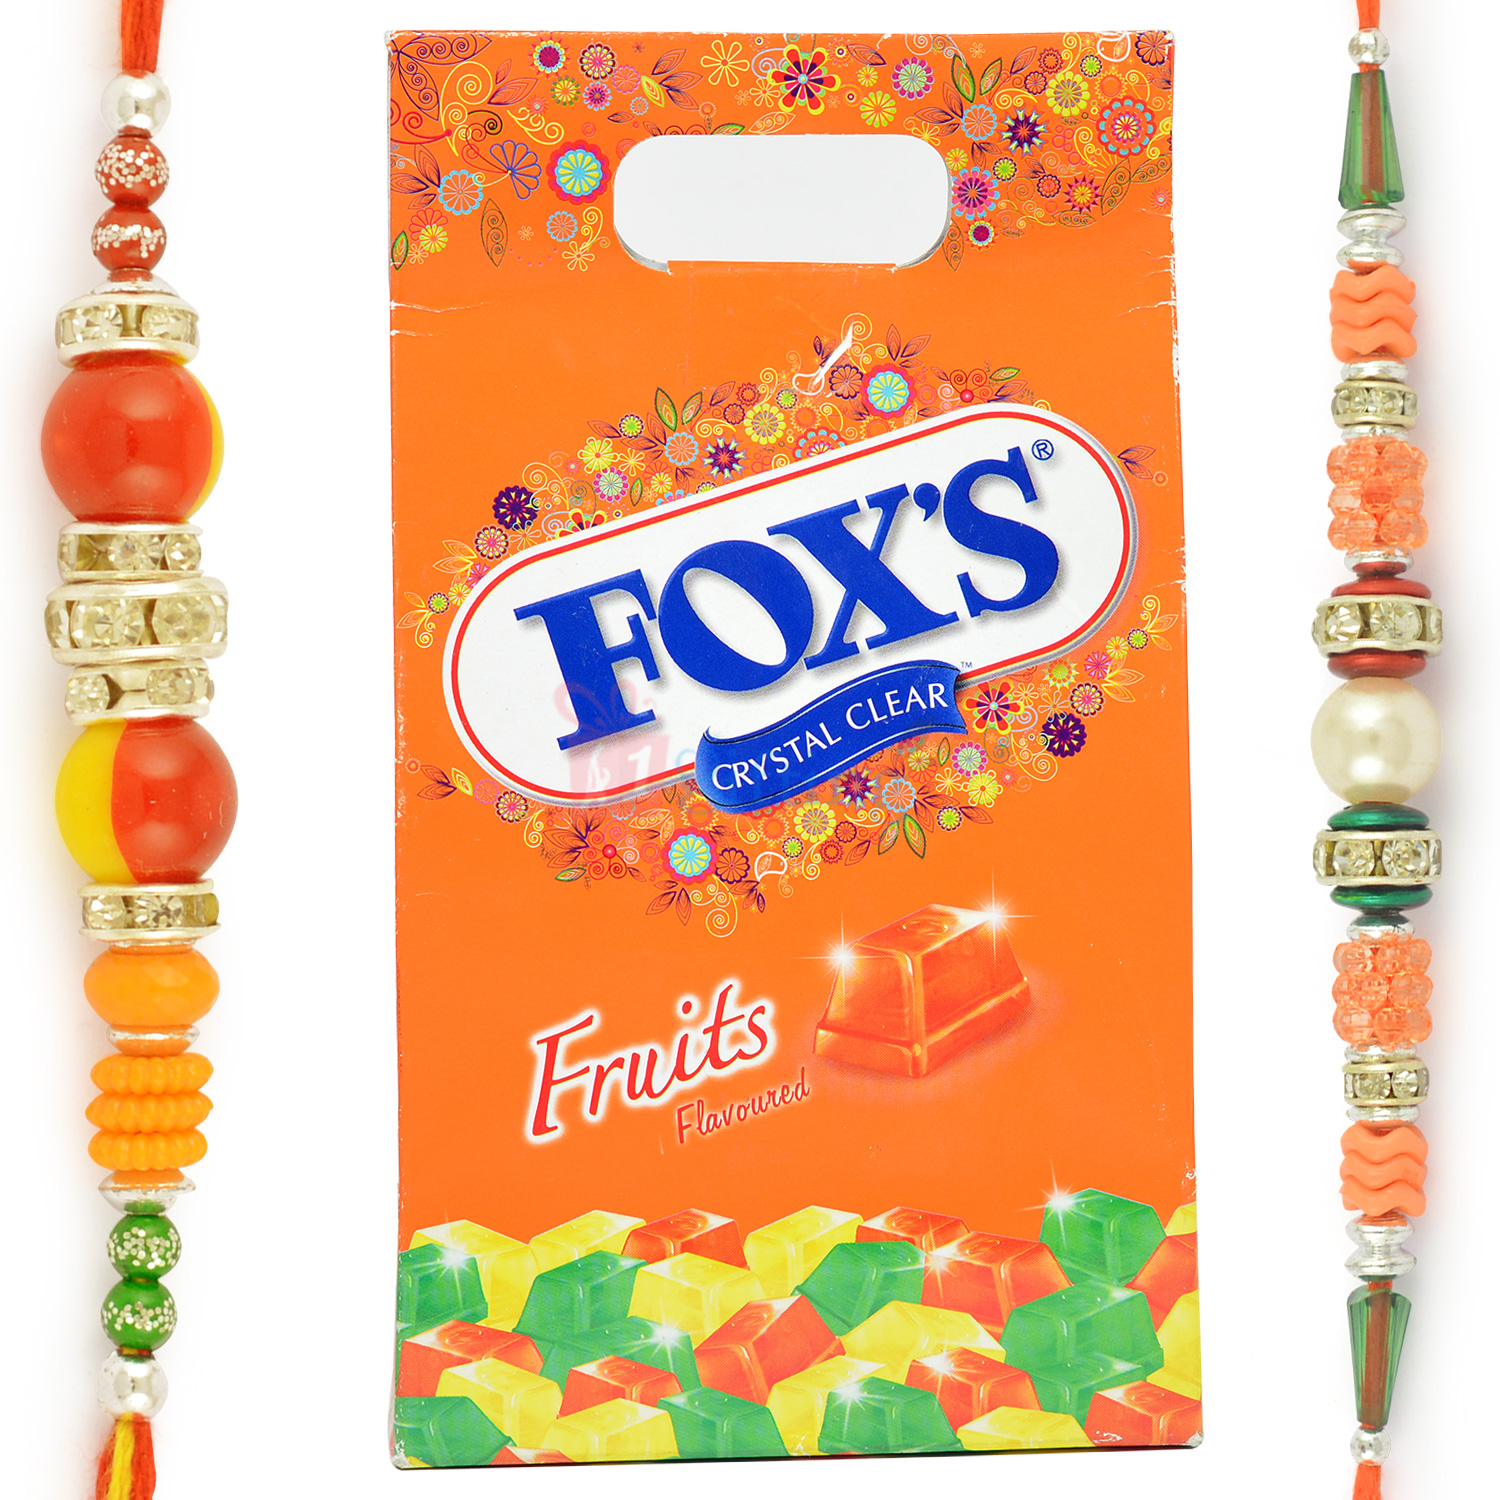 Foxs Crystal Clear Fruit Chocolate and 2 Rakhis for Brother